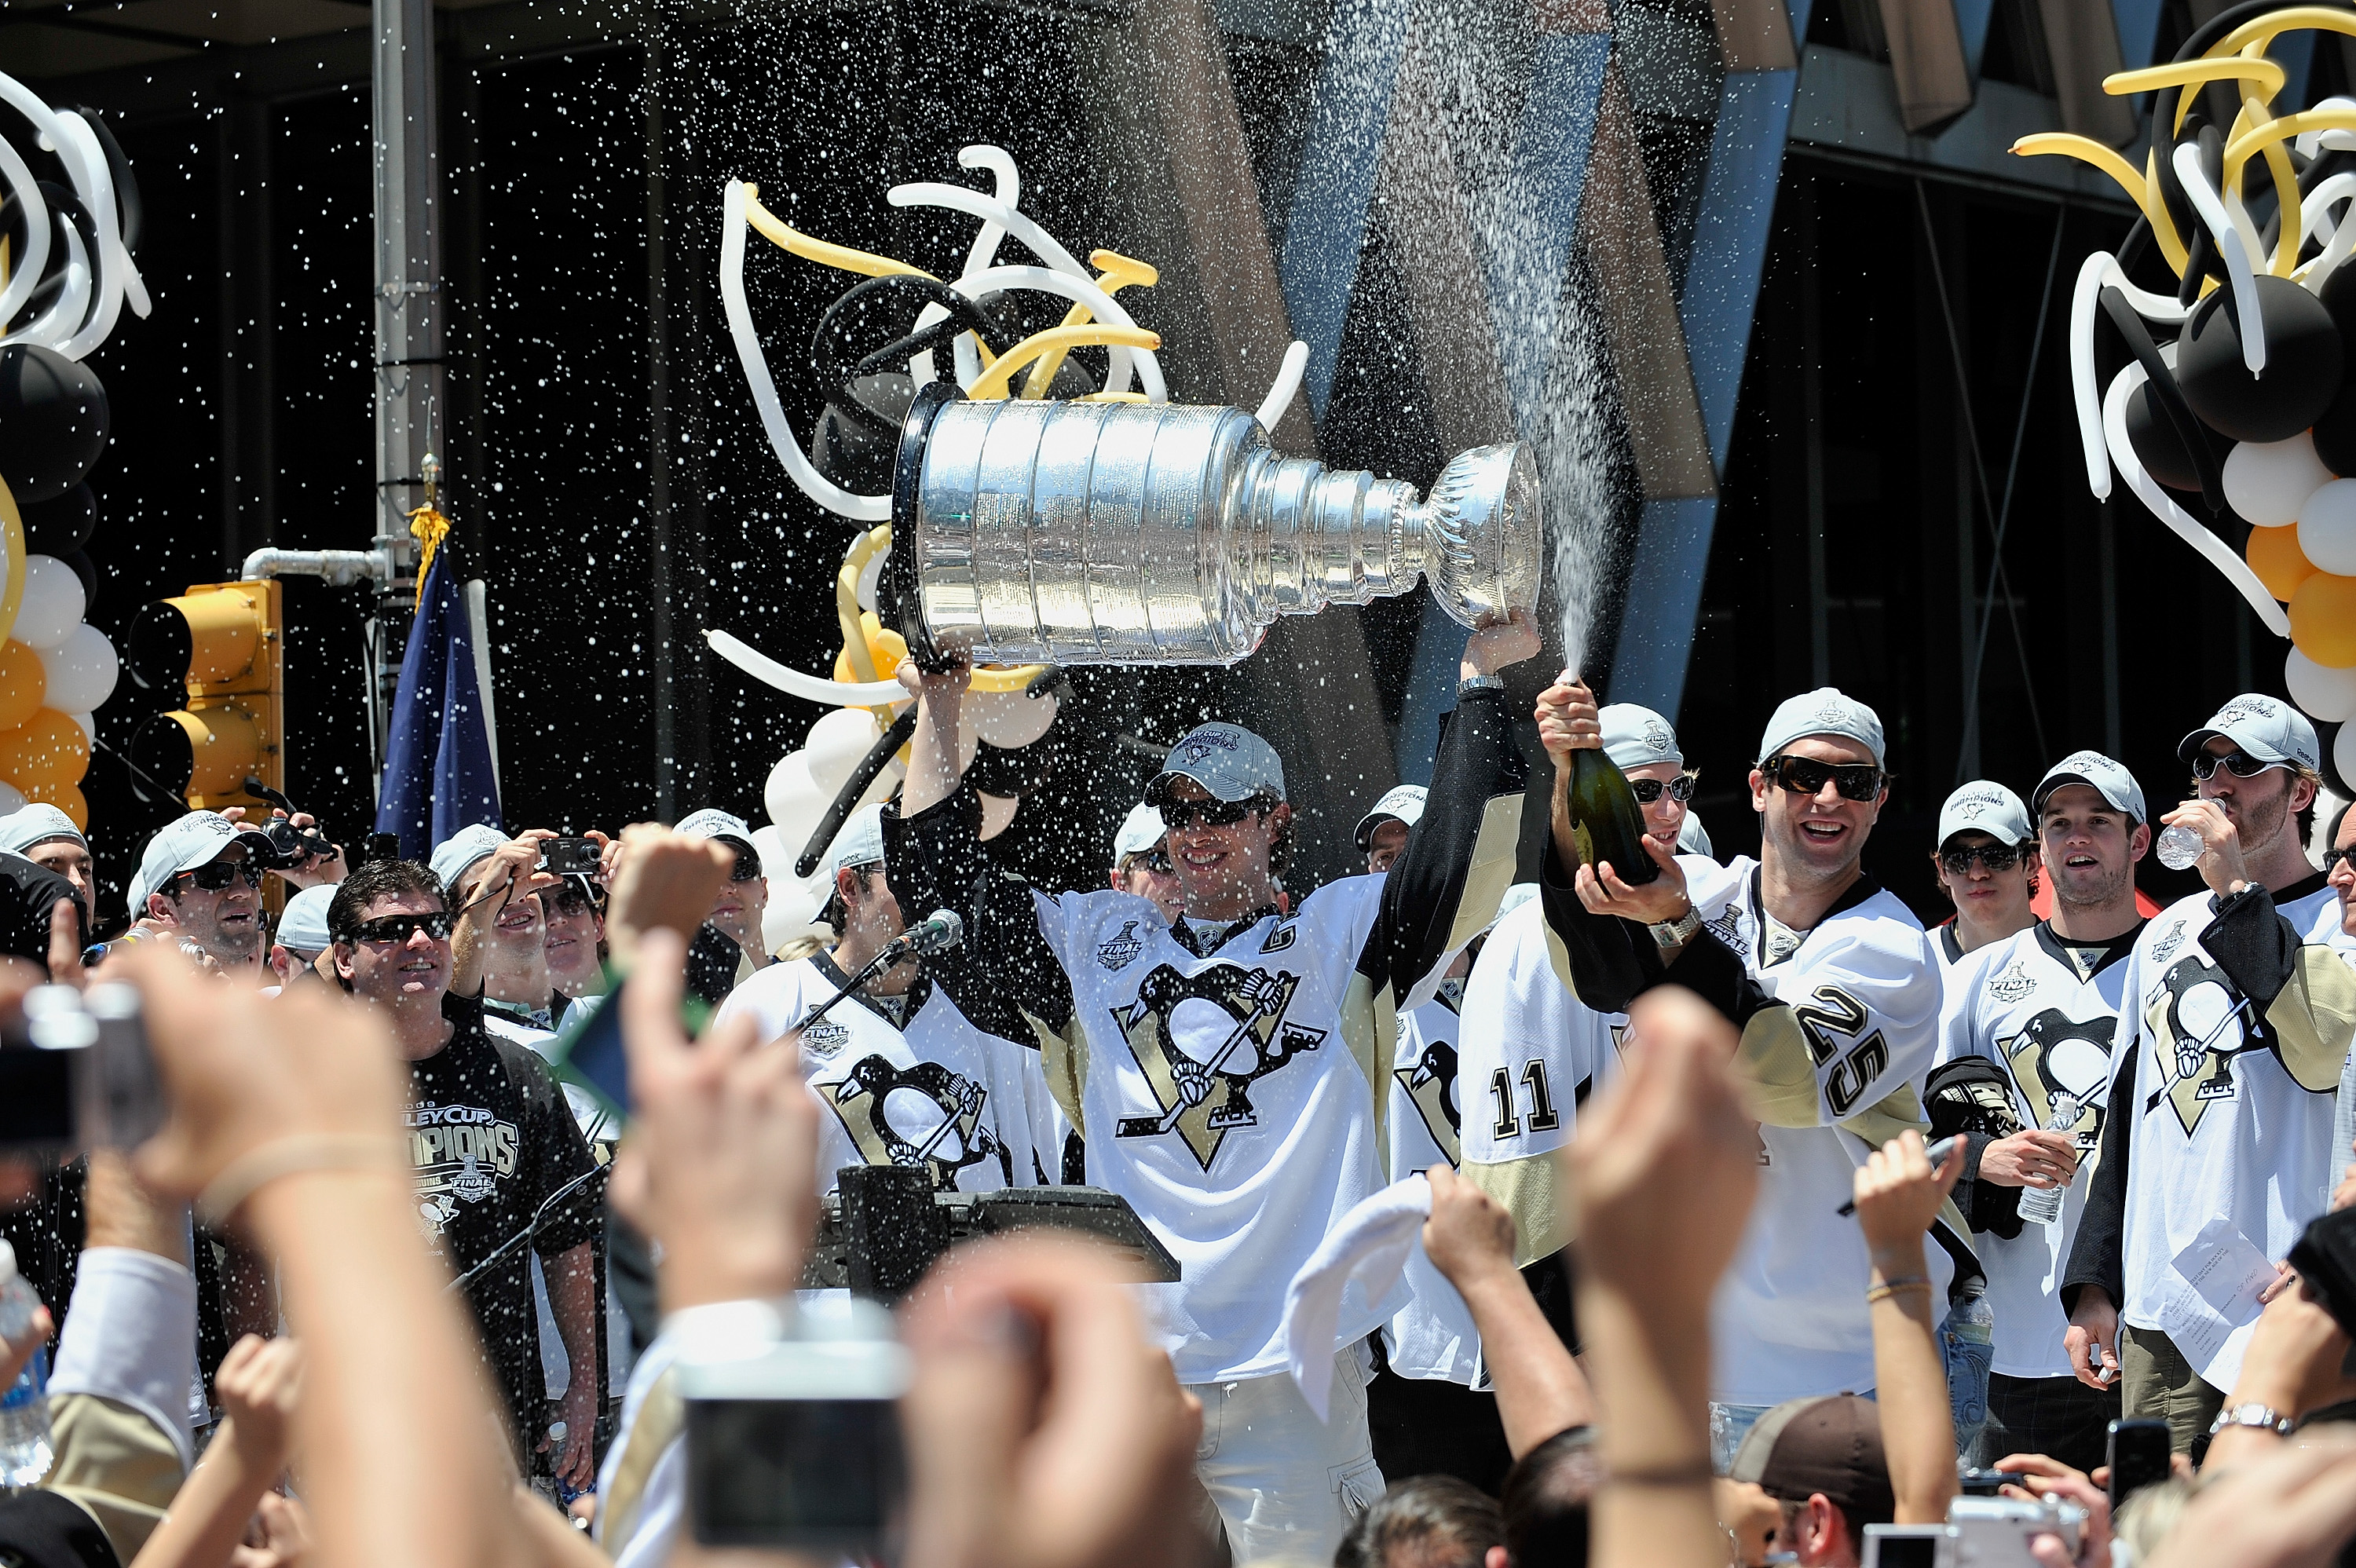 PITTSBURGH - JUNE 15:  Sidney Crosby #87 of the Pittsburgh Penguins holds the Stanley Cup as Maxime Talbot #25 of the Penguins sprays the crowd during Stanley Cup Champion Victory Parade on June 15, 2009 in Pittsburgh, Pennsylvania.  (Photo by Jamie Sabau